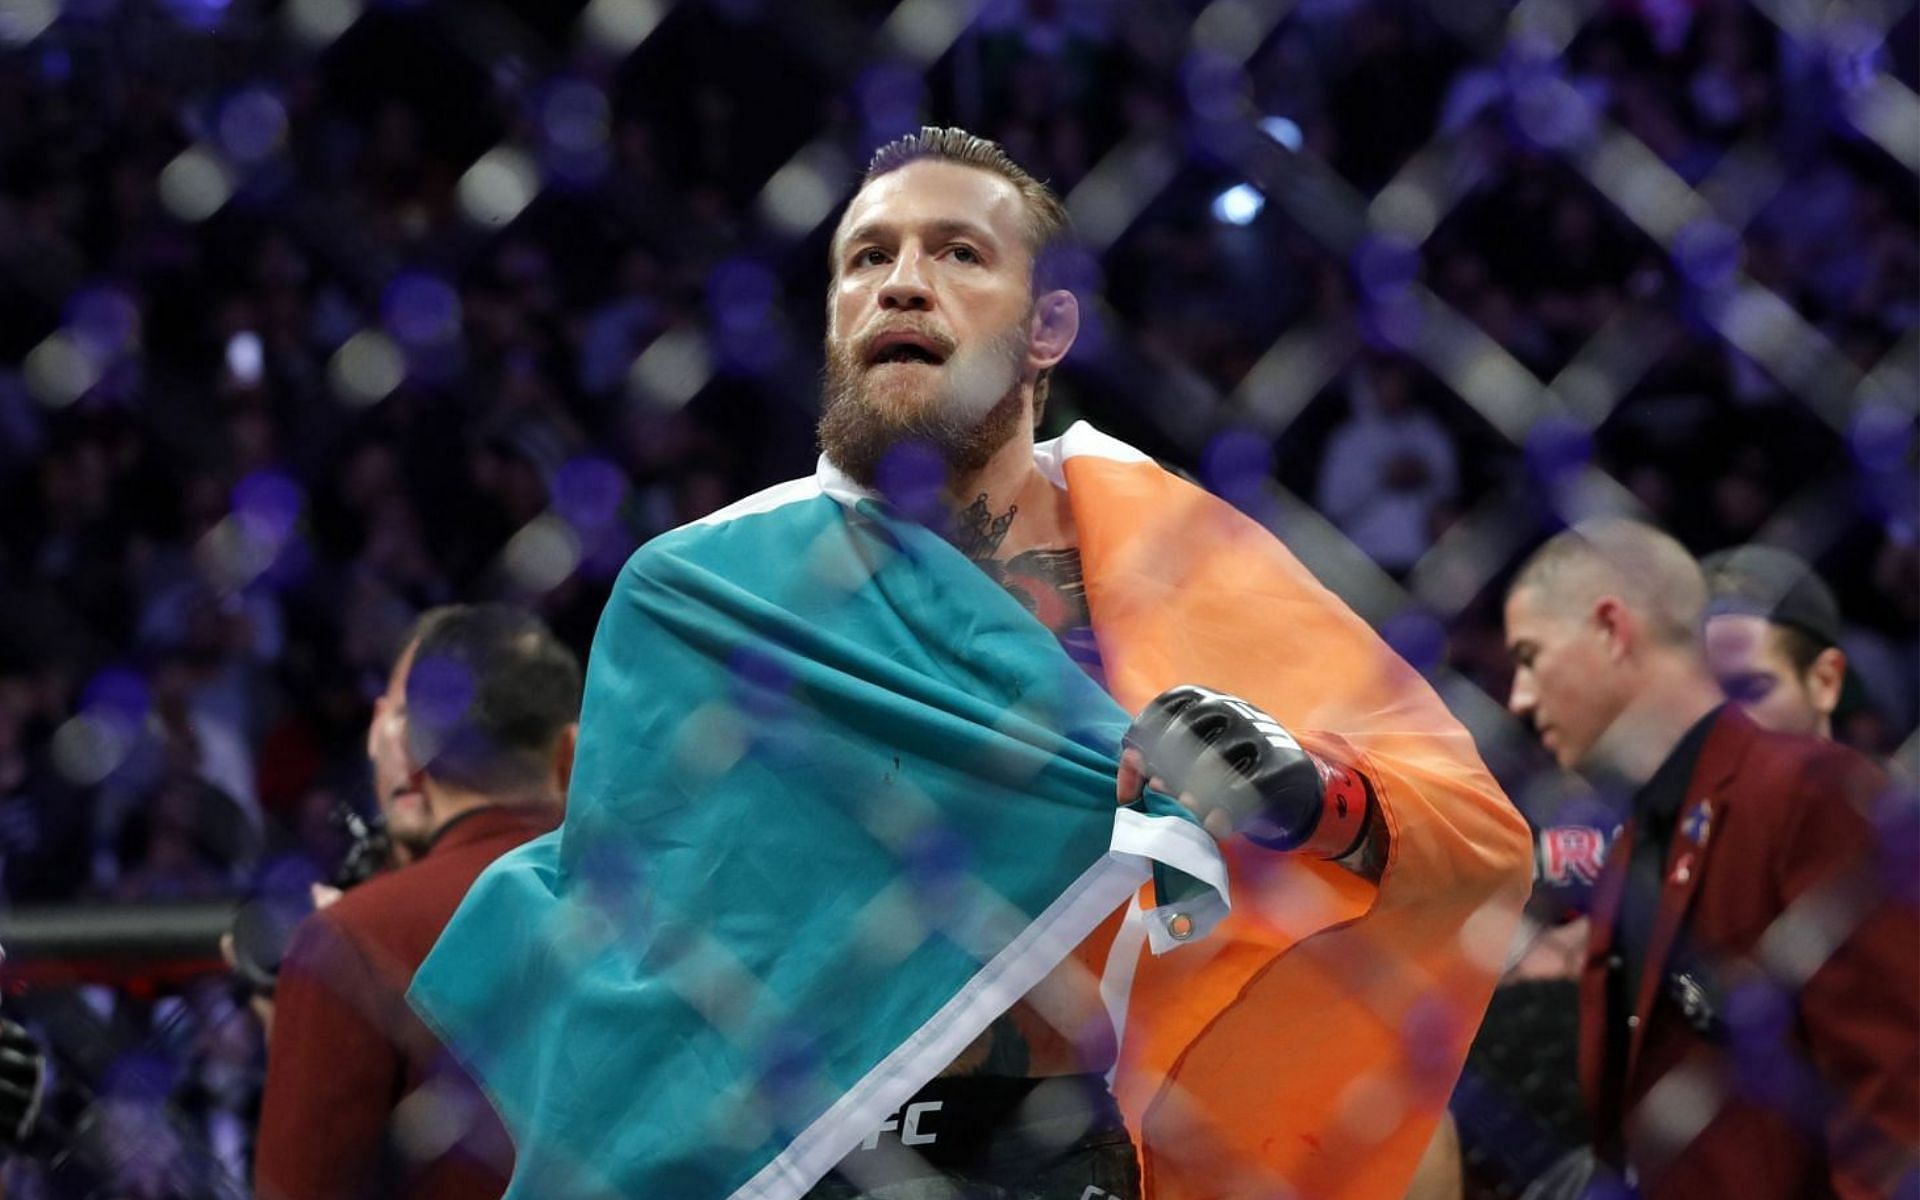 Conor McGregor has announced a brand new investment that will be coming to his hometown of Dublin